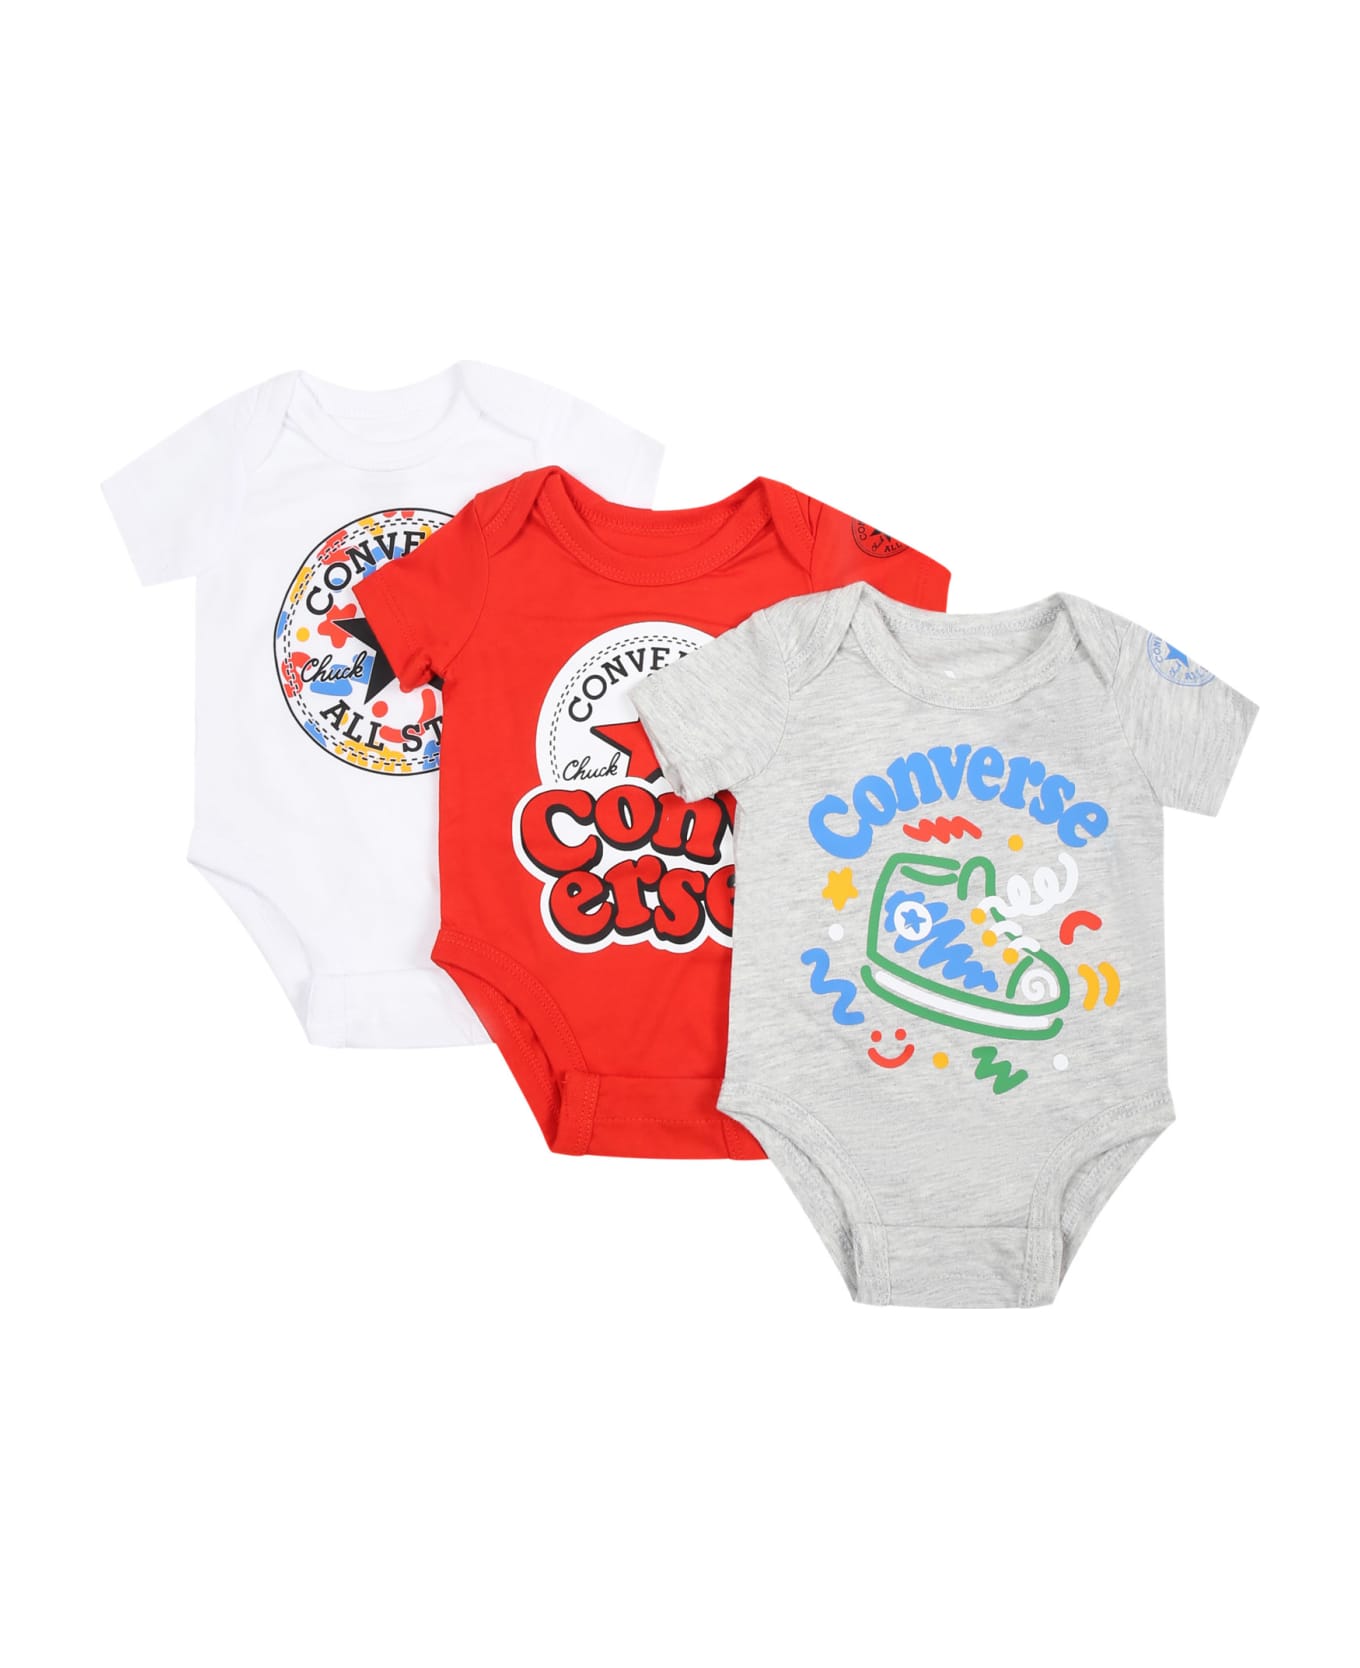 Converse Multicolor Set For Baby Boy With Logo And Print - Multicolor